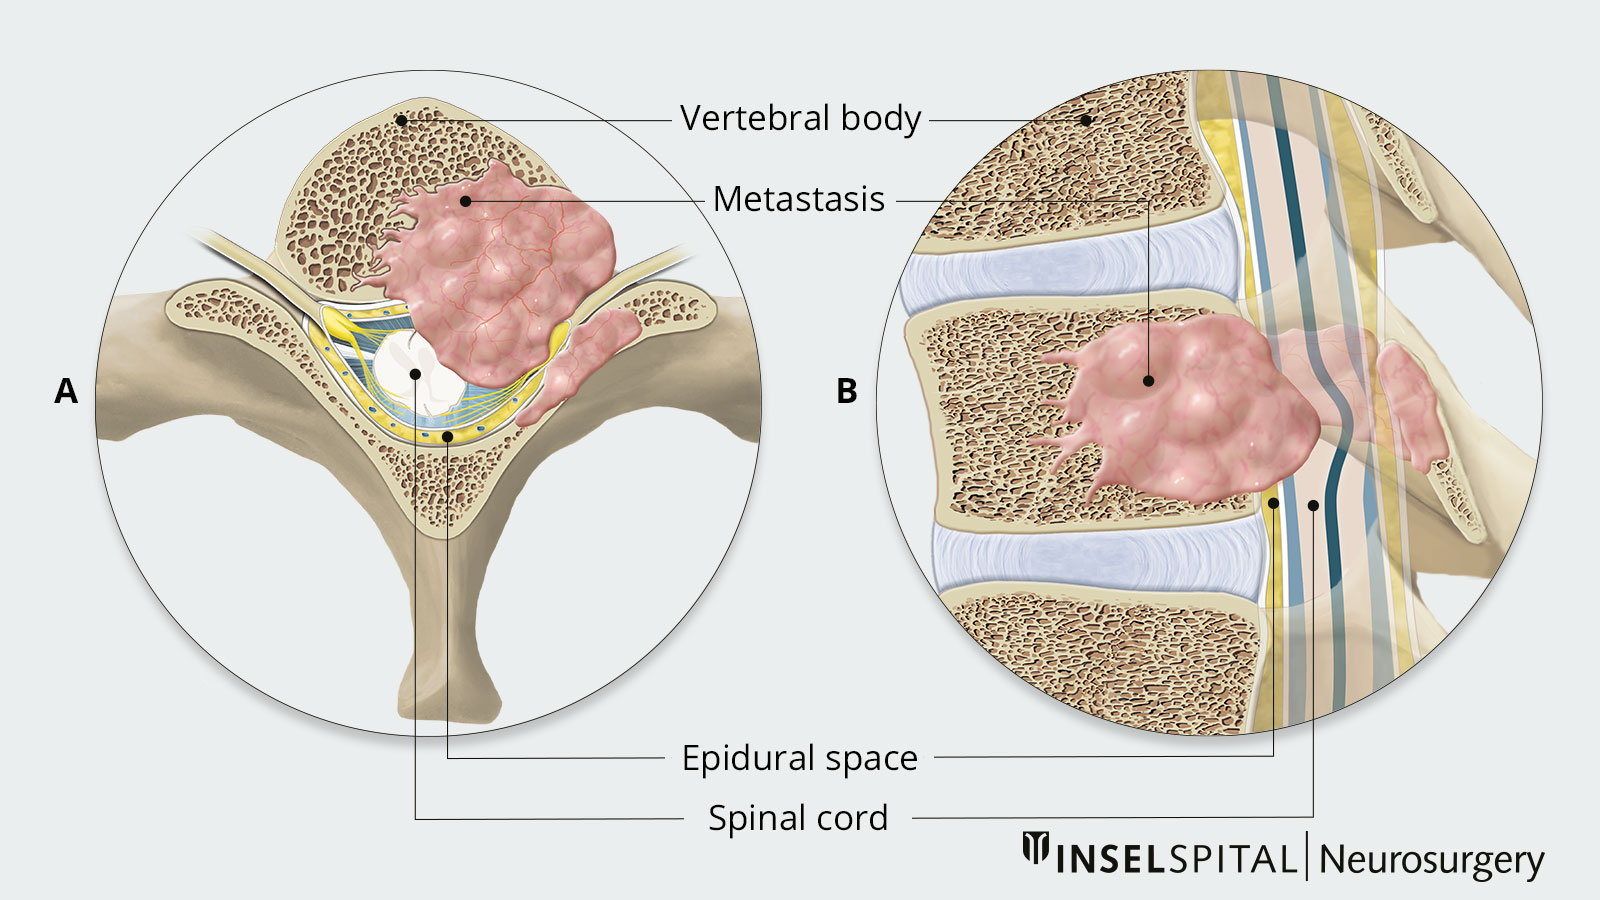 Cross-sectional drawing of a vertebral body with clearly visible metastasis and spinal cord compression